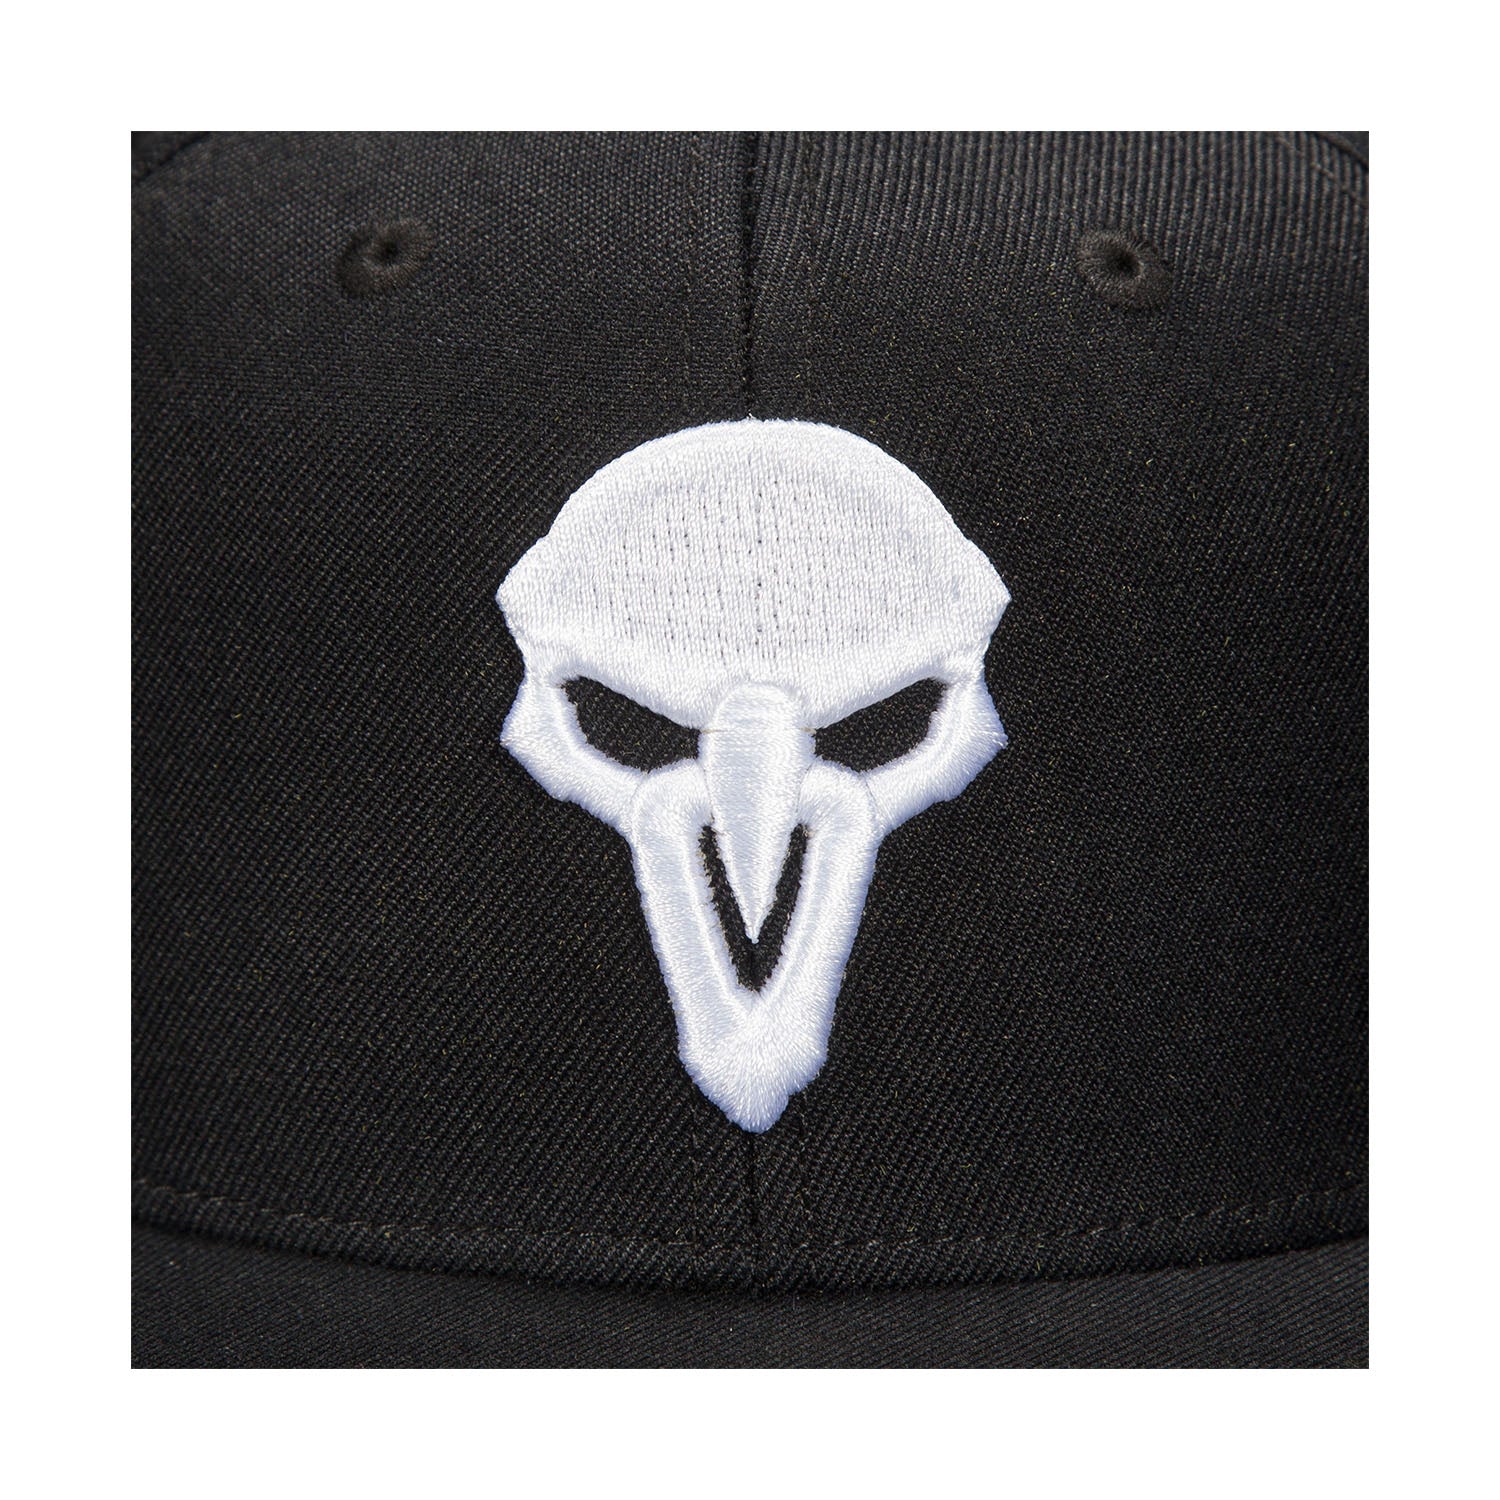 Overwatch Back from the Grave J!NX Black Snapback Hat - Zoom View